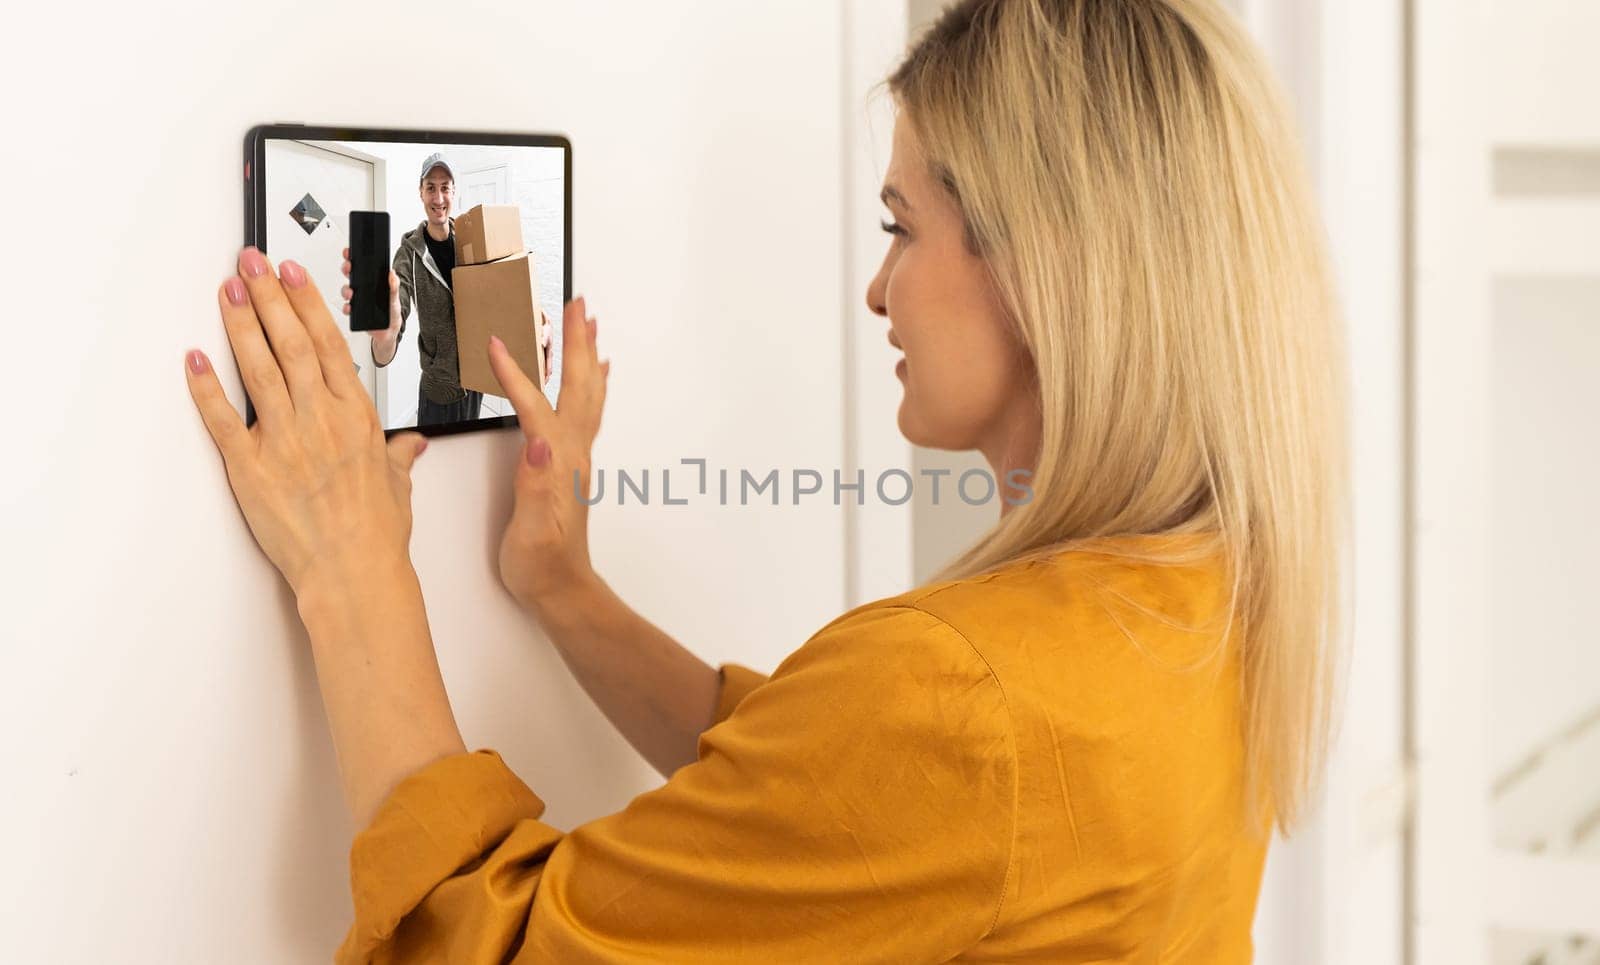 Woman watching delivery man on security camera cctv video on tablet by Andelov13